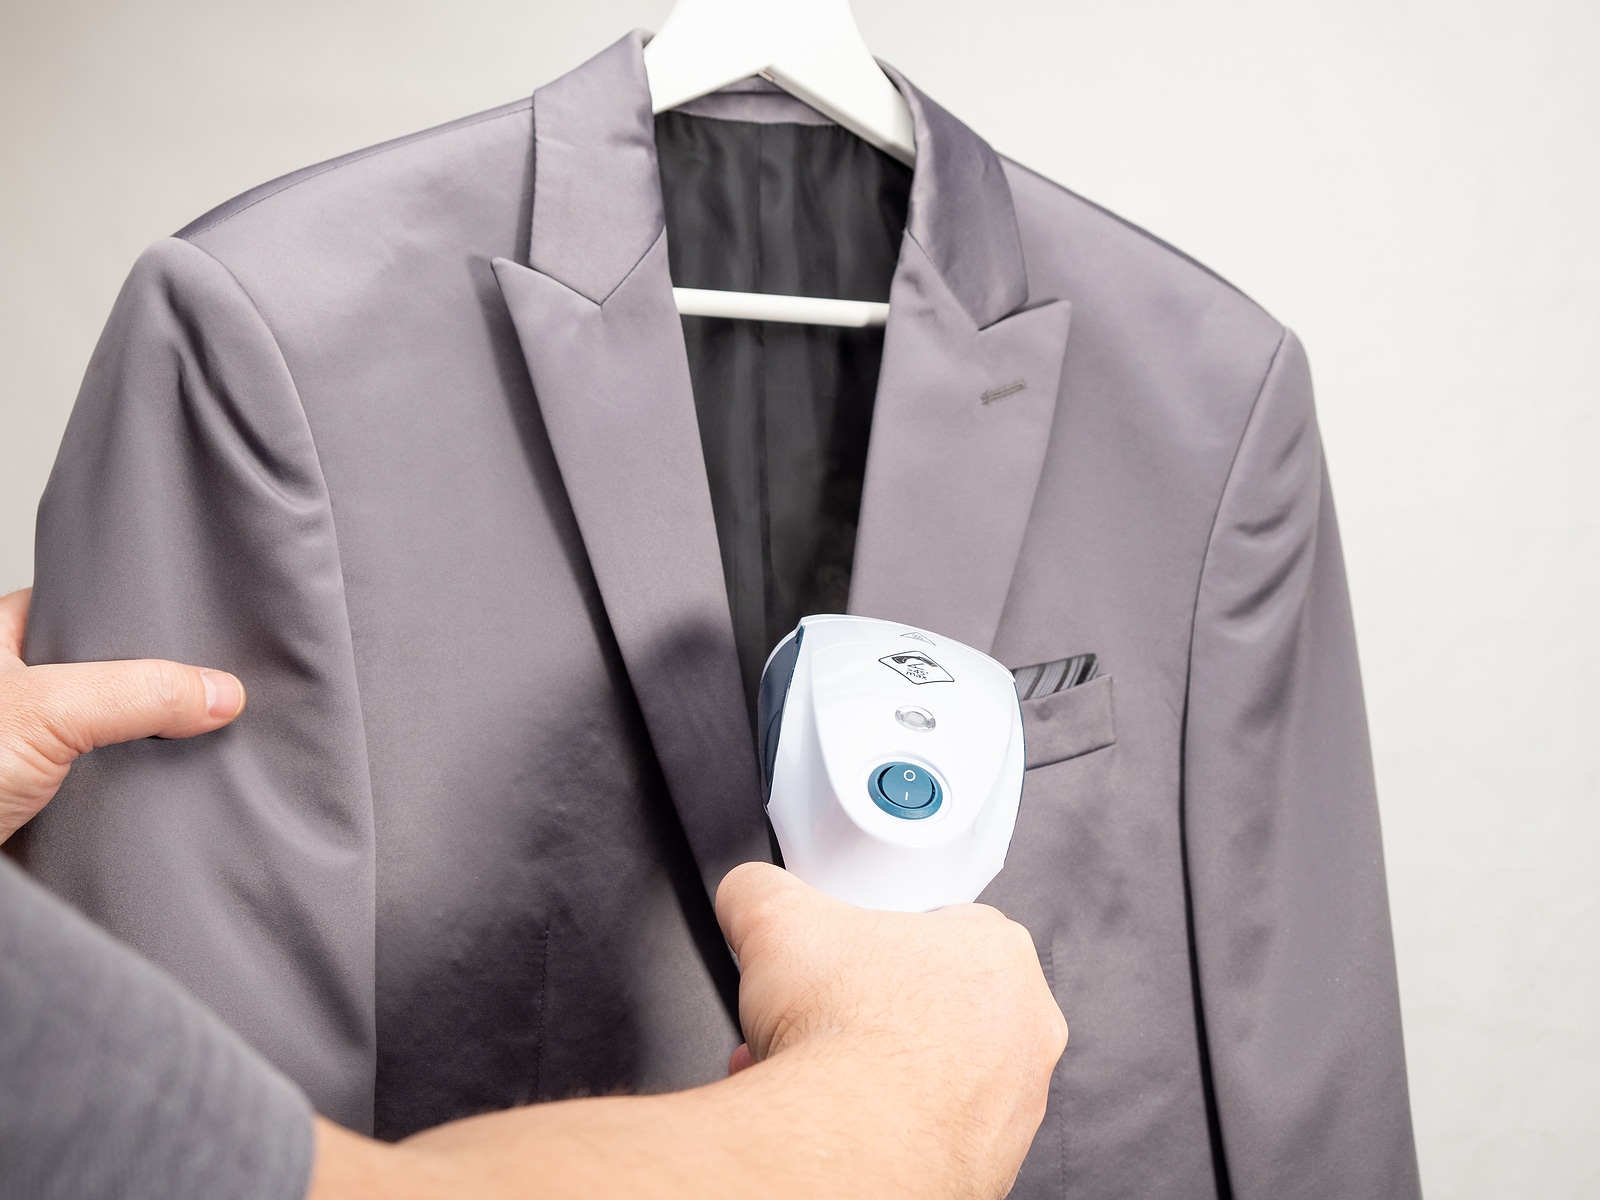 In Hand Steamer For Clothes The Suit Is Ironed With A Portable